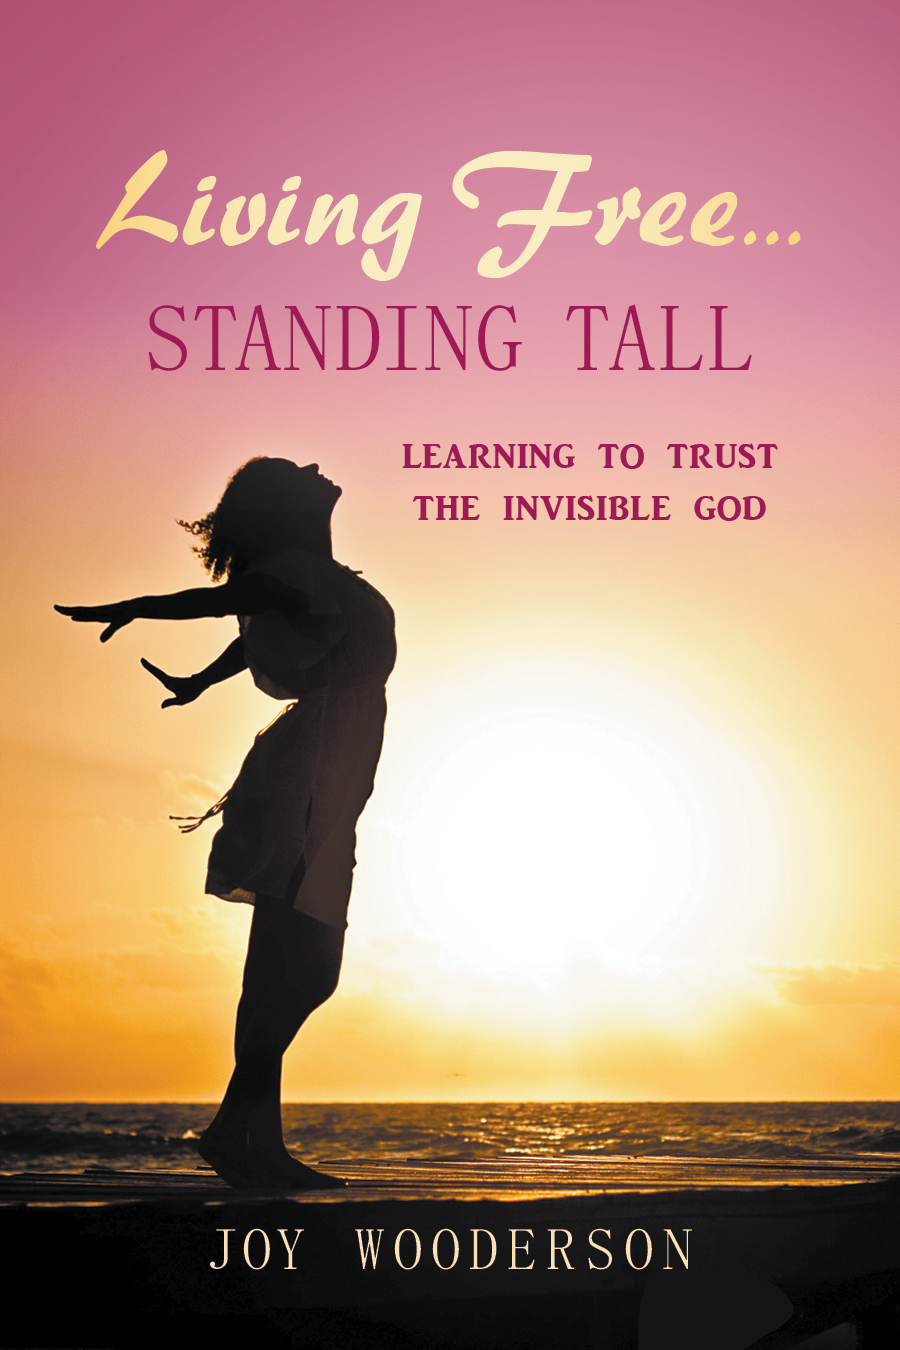 Joy Wooderson’s new Christian book helps readers learn to trust God